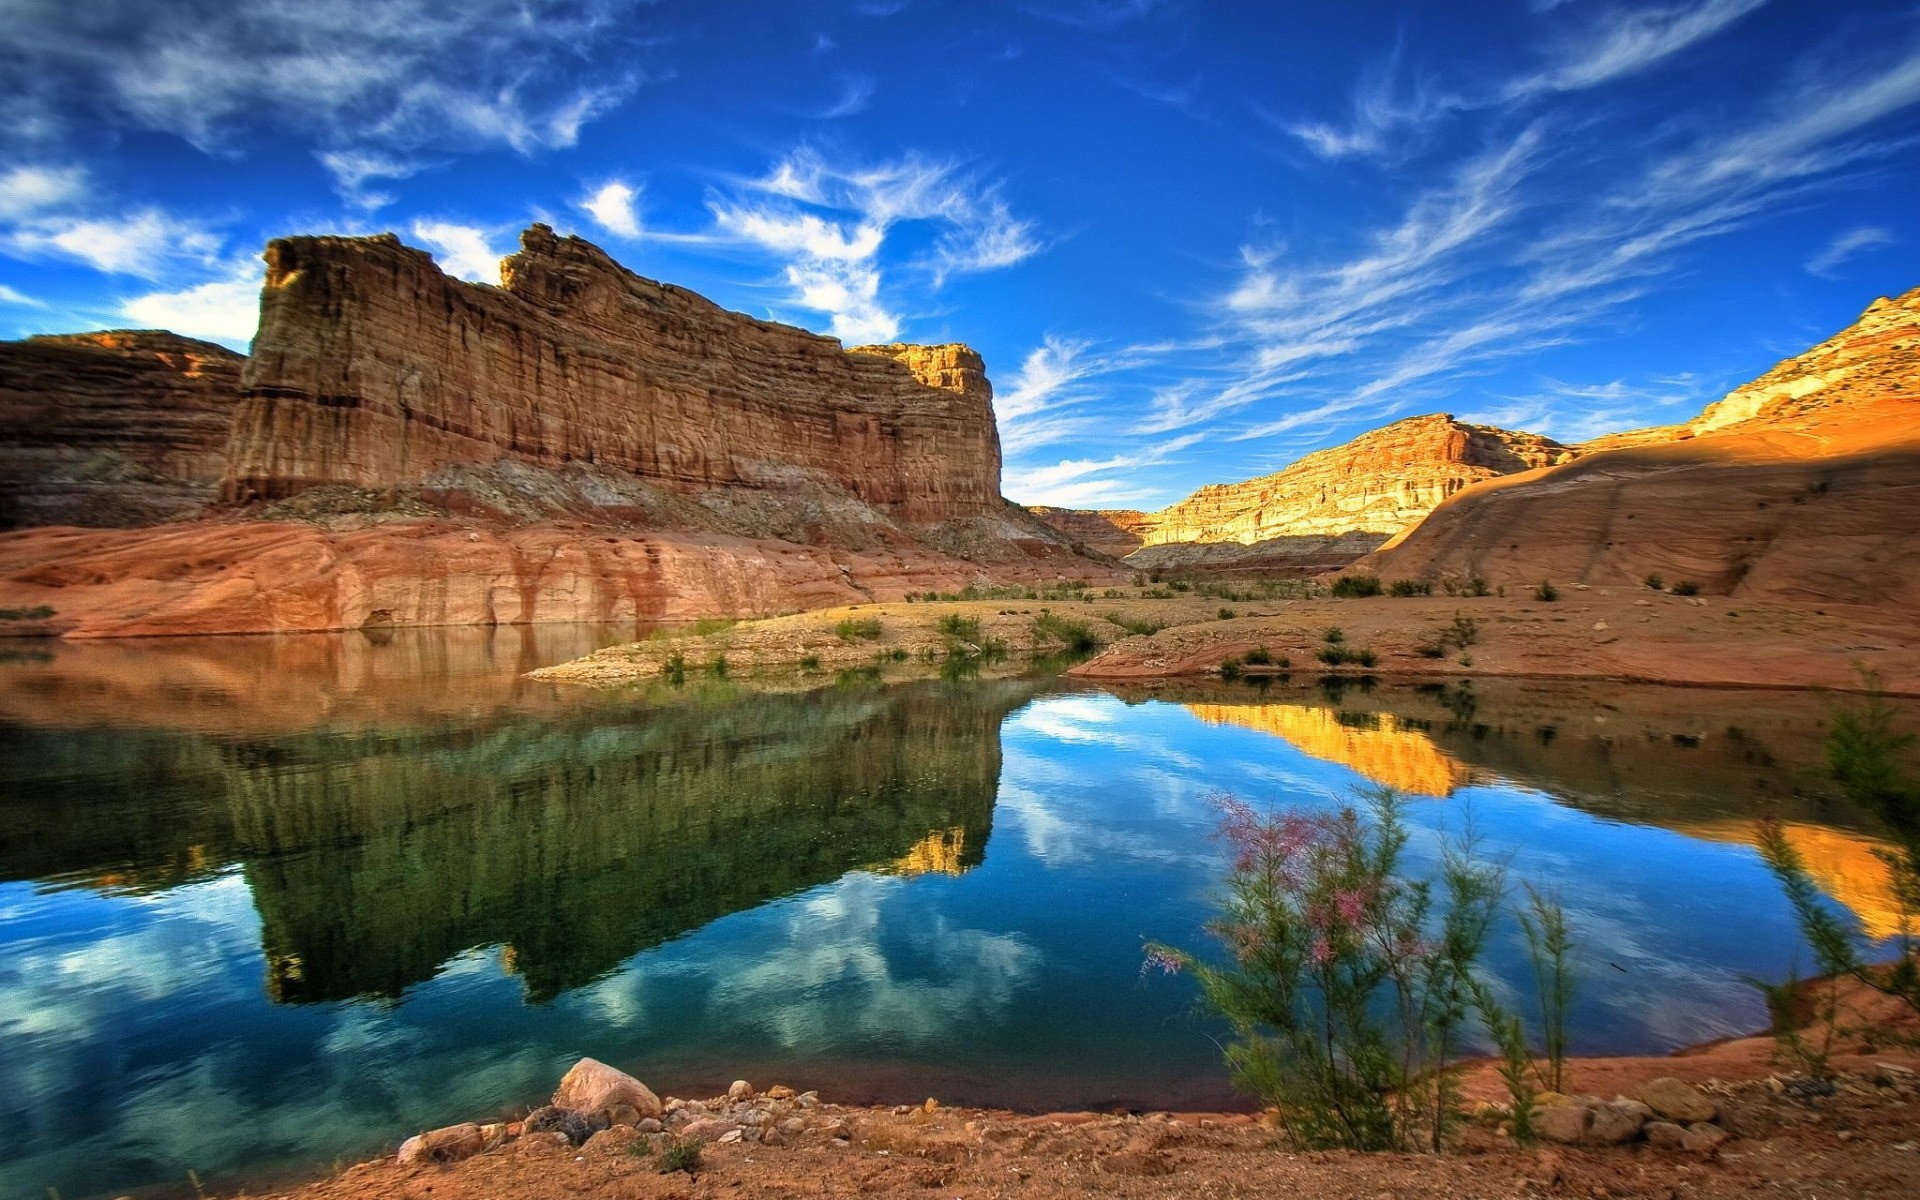 landscapes travel water landscape scenic outdoors nature rock sky mountain desert geology remote canyon valley sandstone lake sunset reflection dawn stones rocks